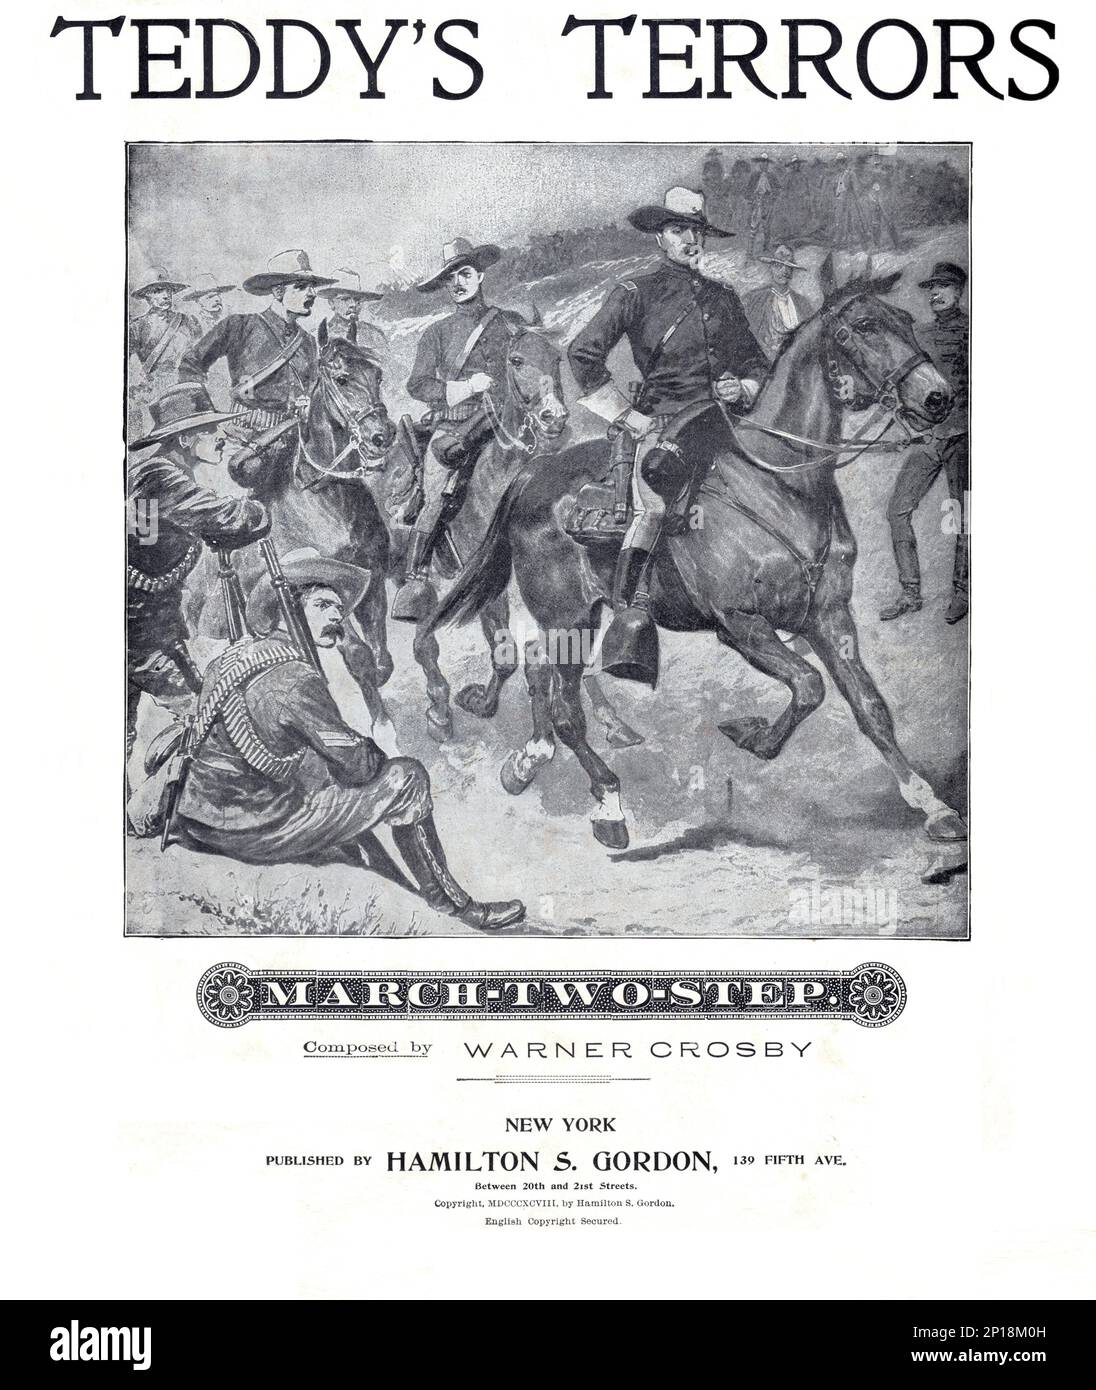 Teddy's Terrors, 1898 Sheet Music featuring Theodore Roosevelt on horseback during his charge up San Juan Hill in Cuba during the Spanish American War Stock Photo